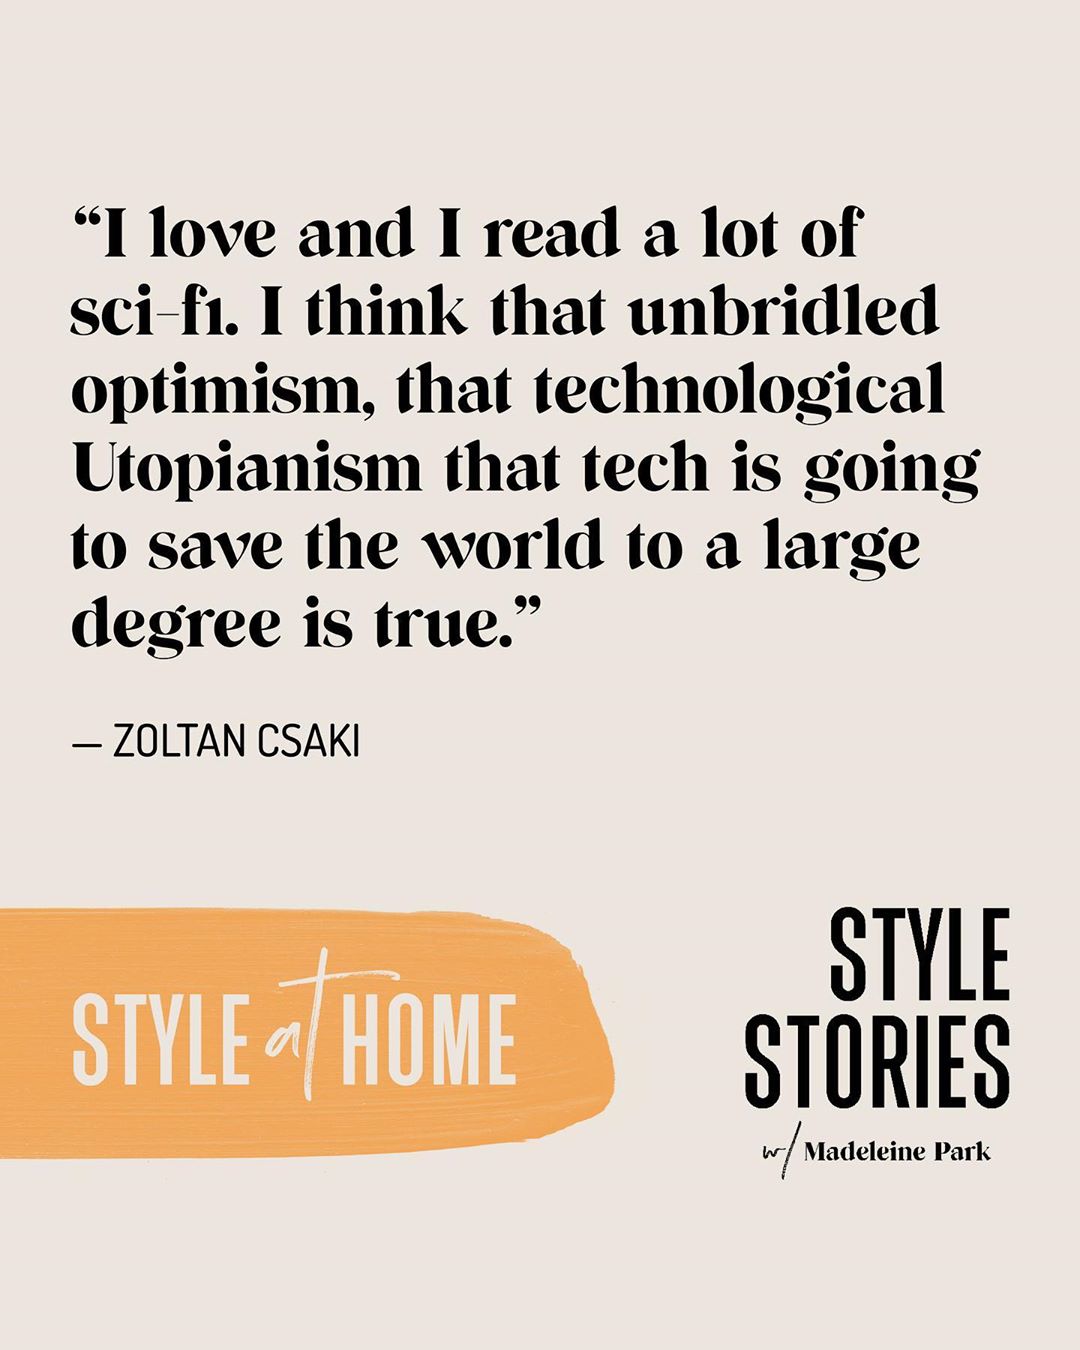 Zoltan Csaki, CoFounder of Citizen Wolf as quoted by Style Stories